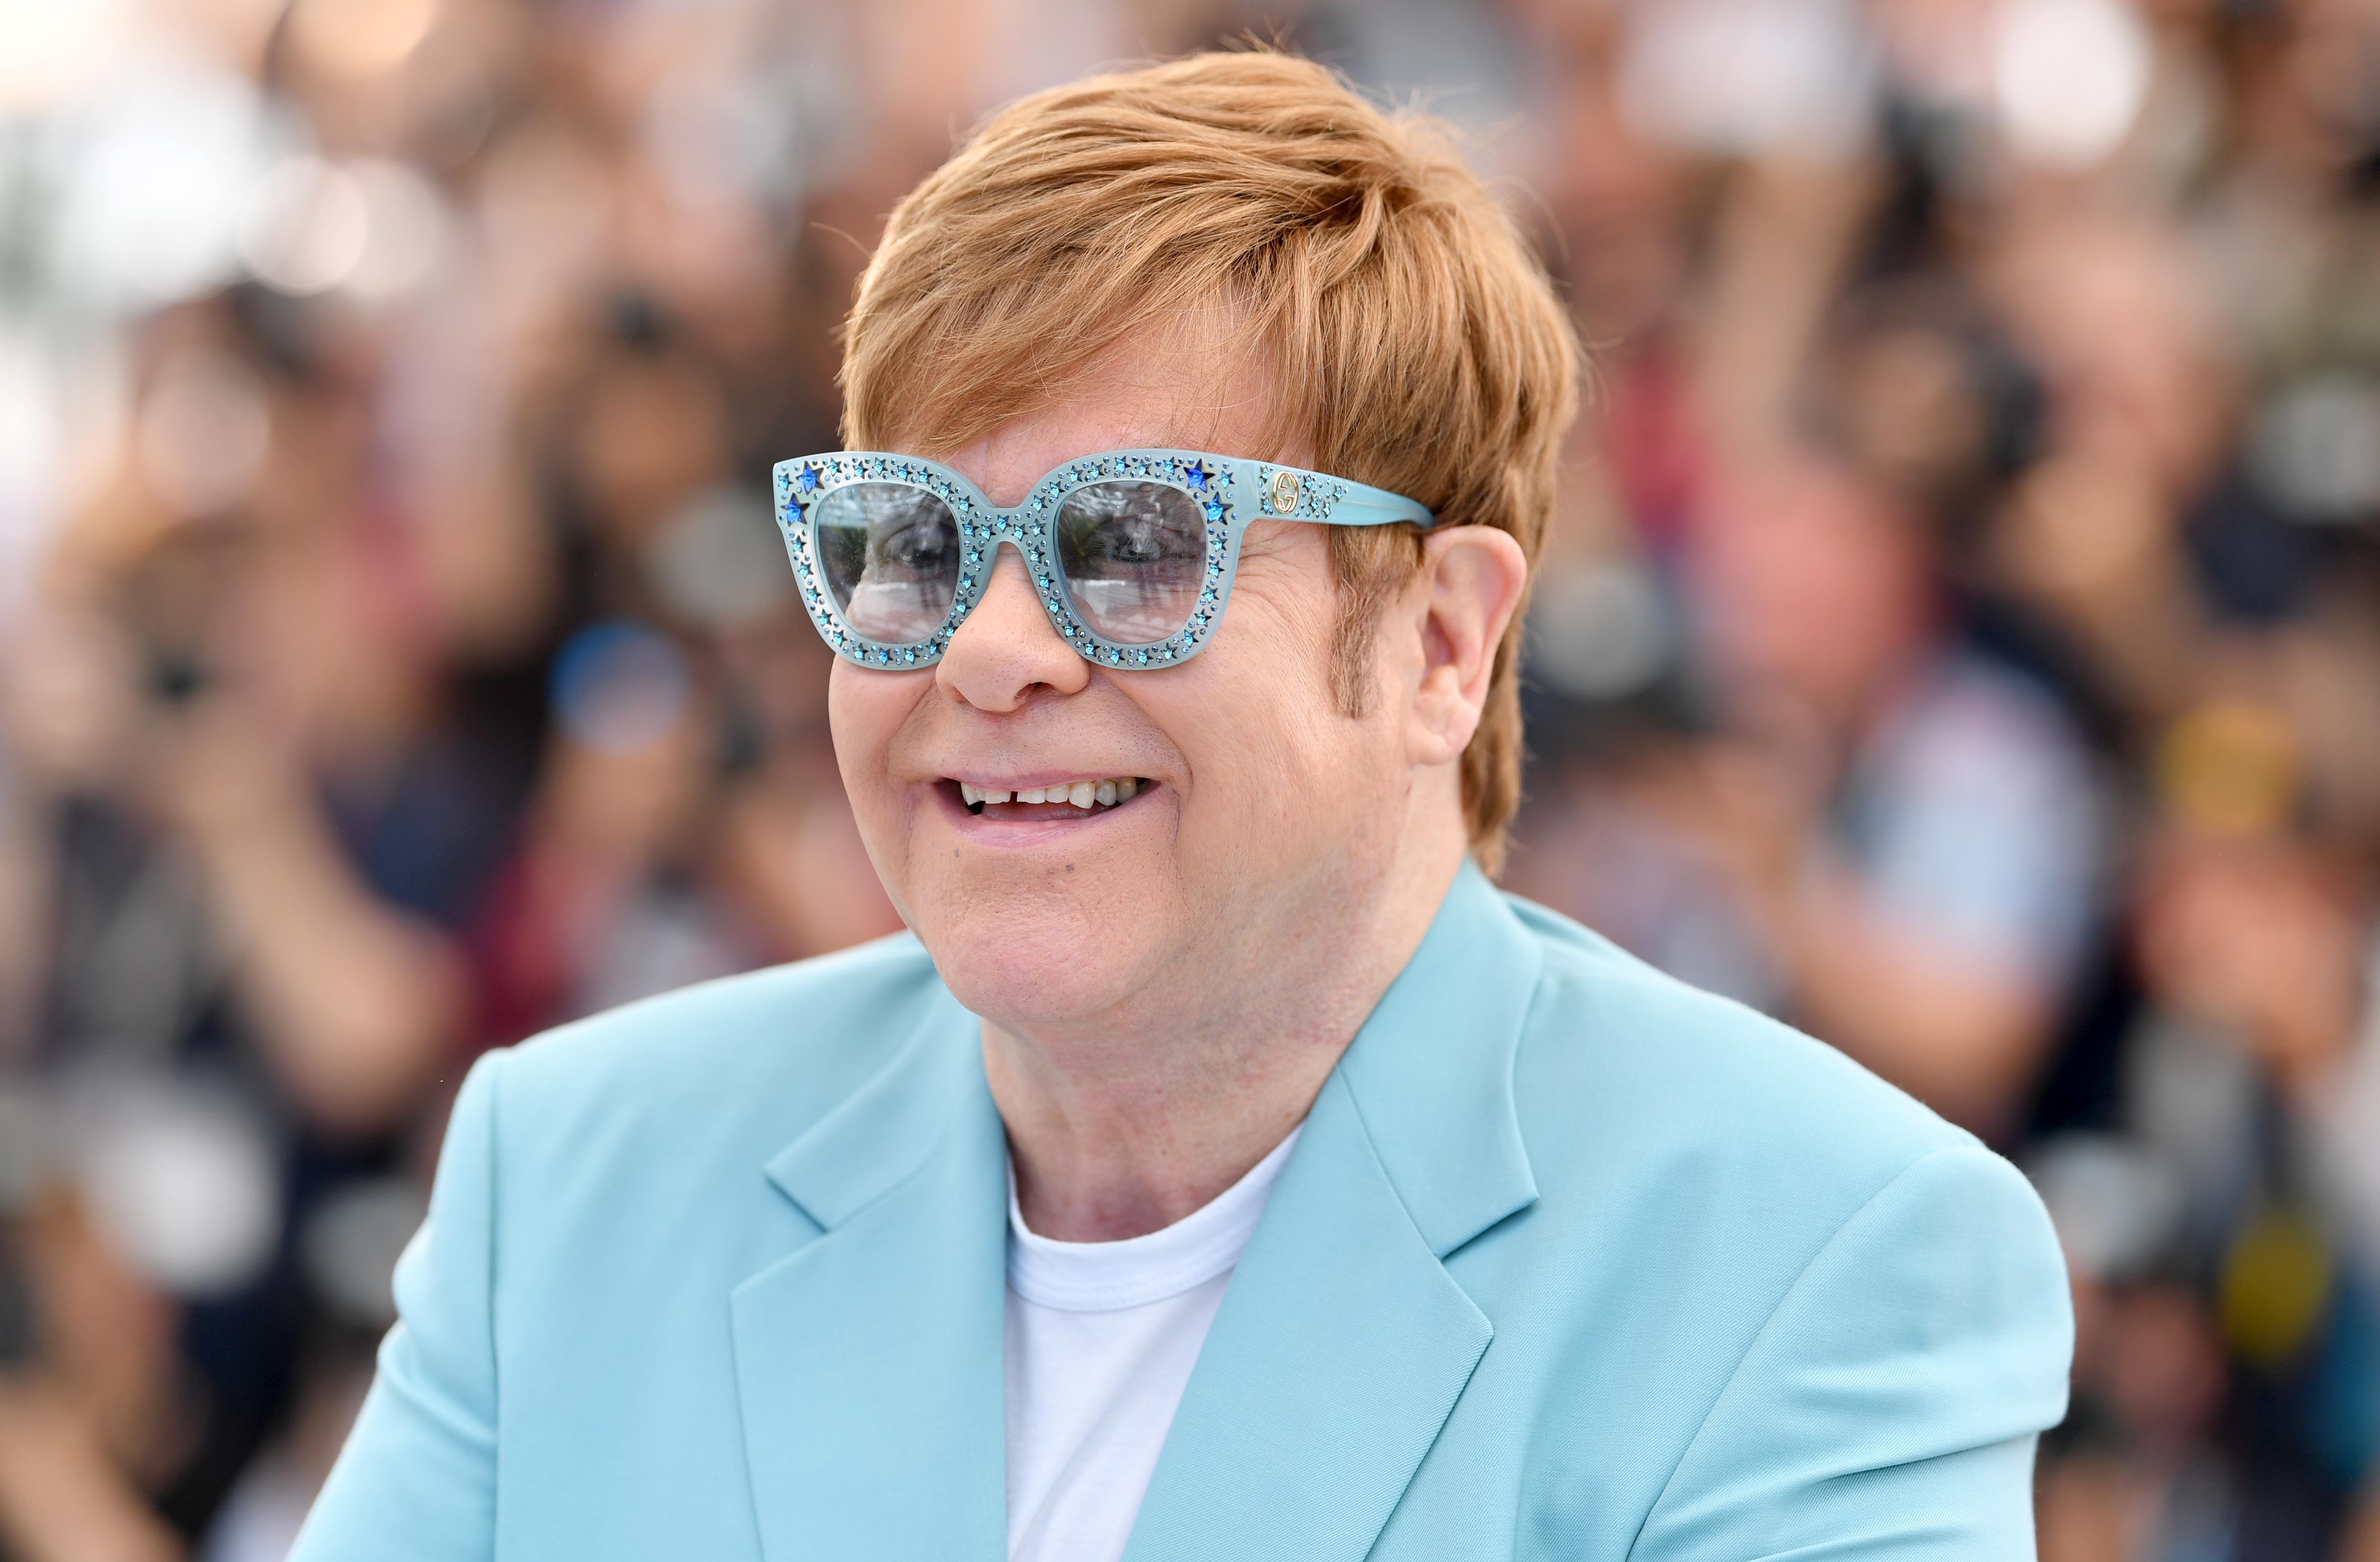  Elton John attends the photocall for "Rocketman" during the 72nd annual Cannes Film Festival on May 16, 2019 | Photo: Getty Images.